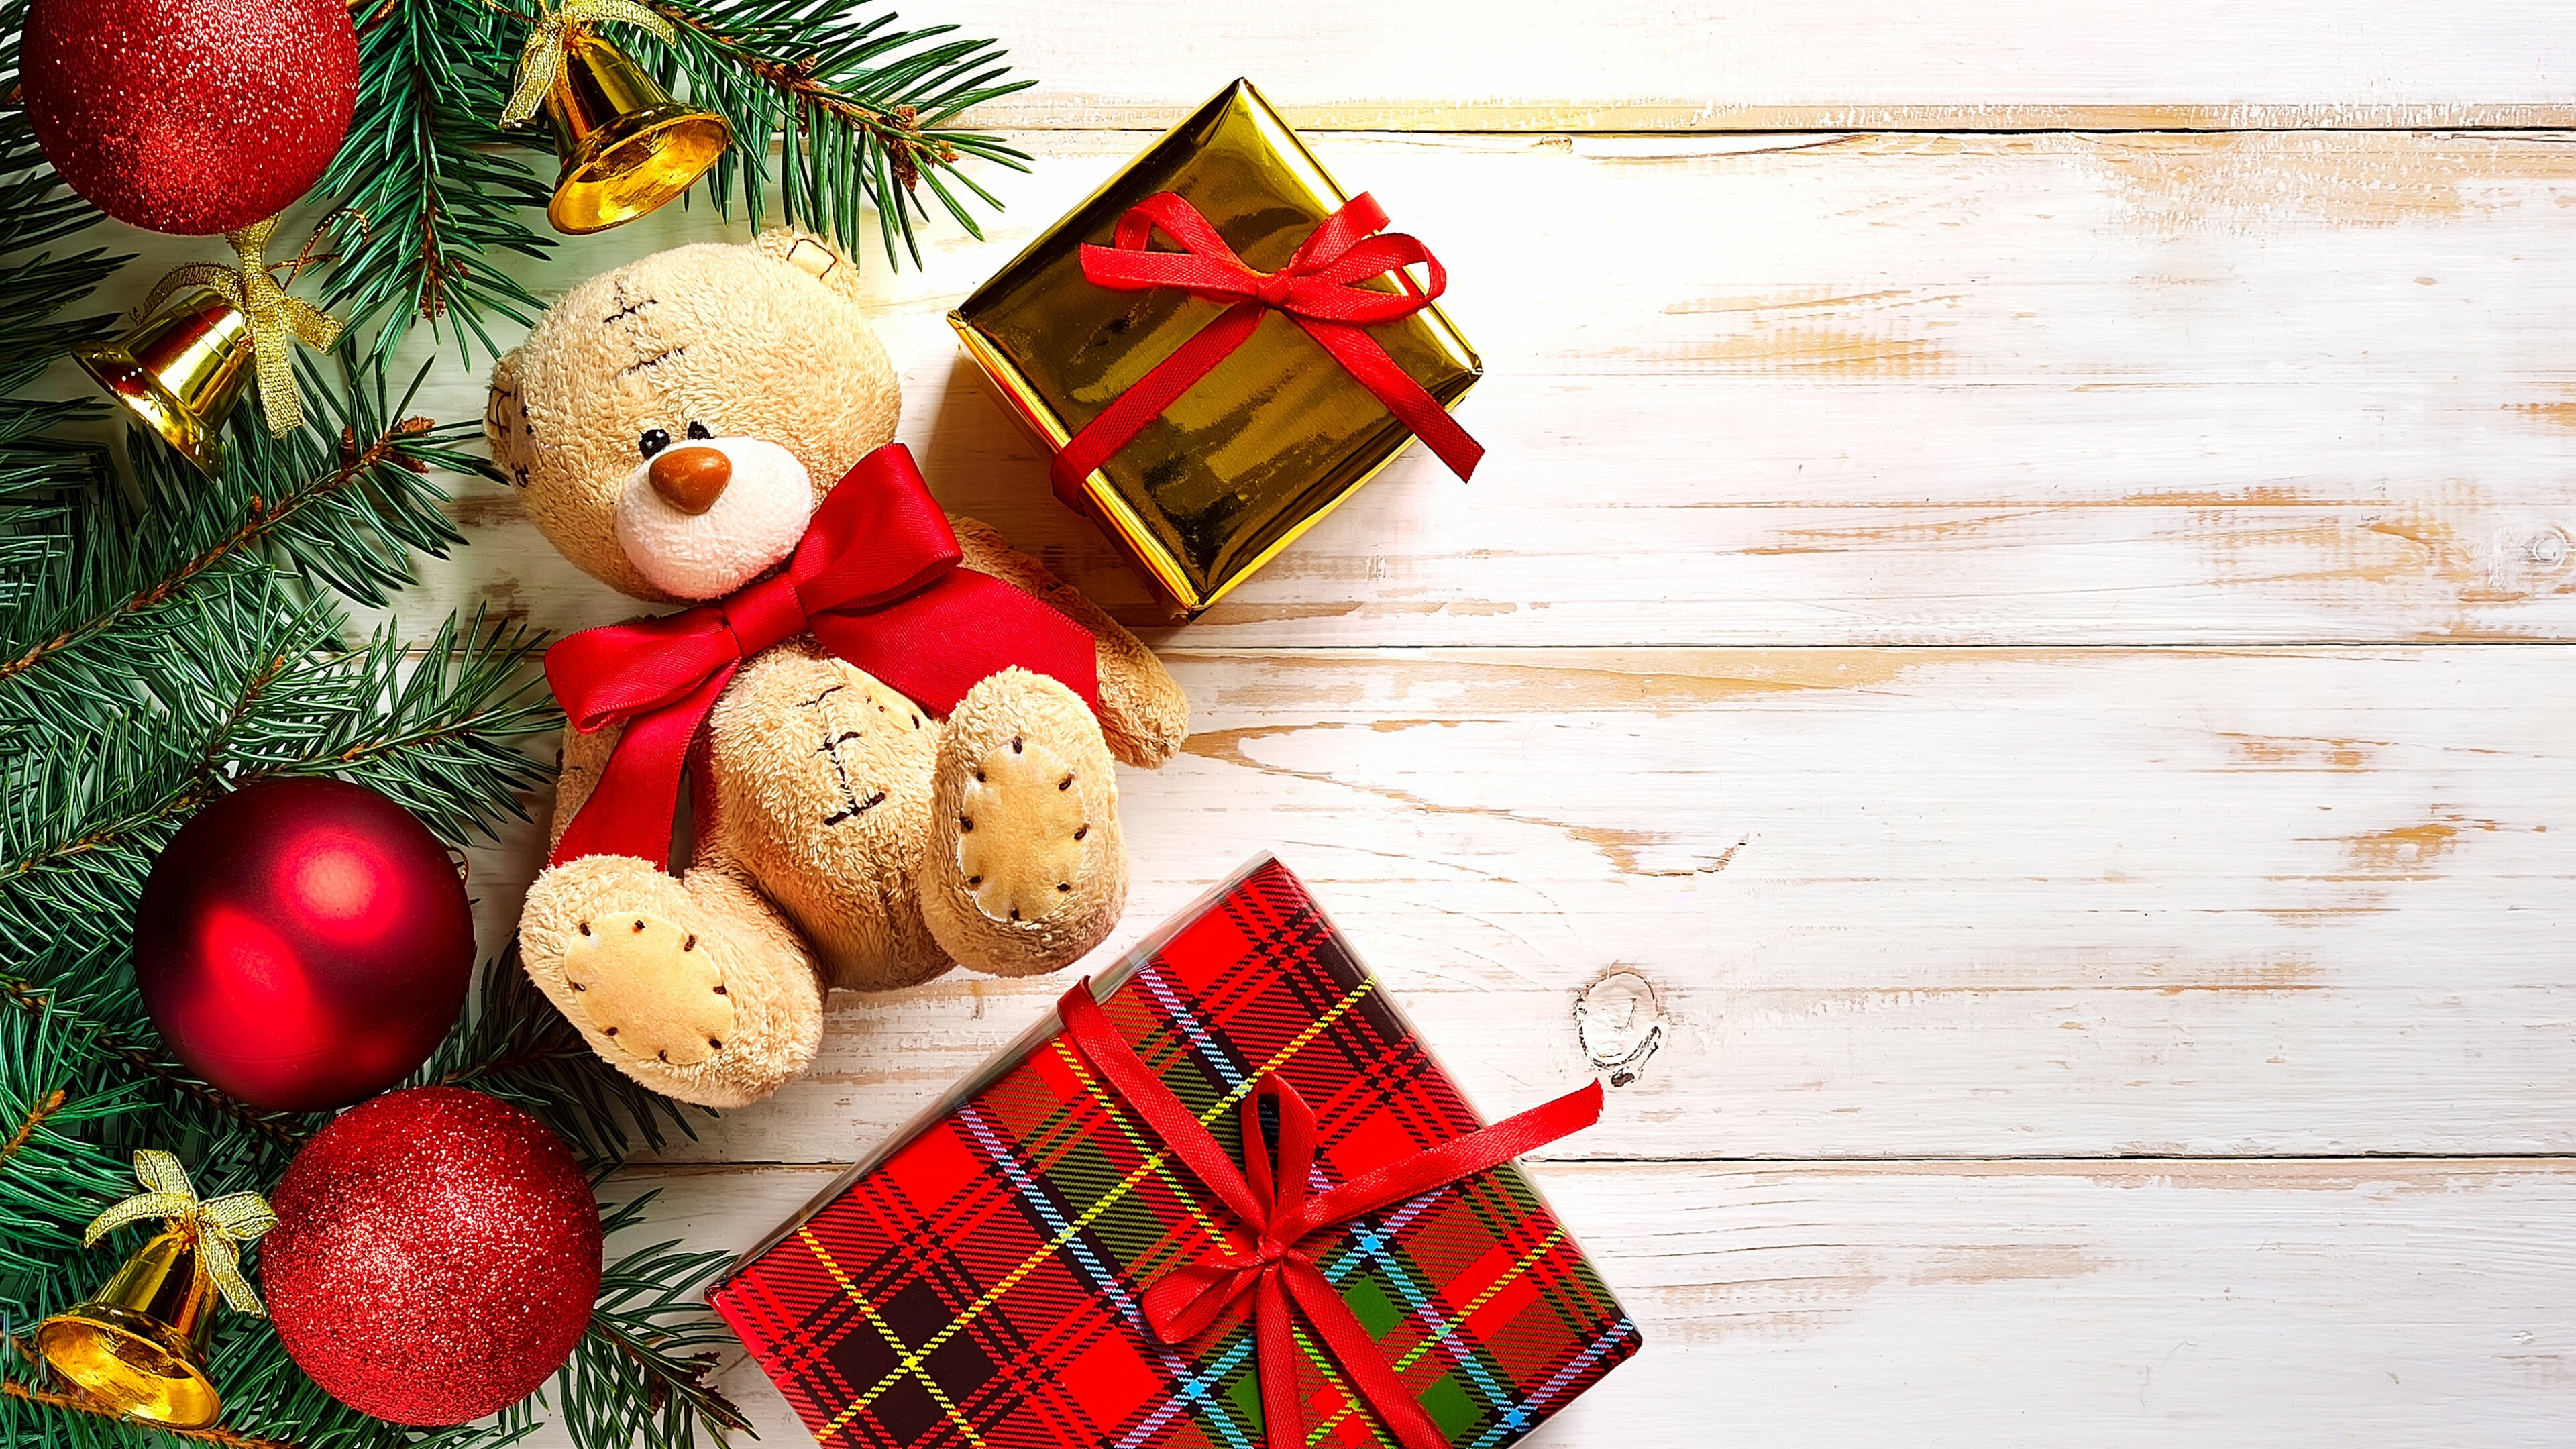 Decorations: Christmas, New Year, Gifts, Toys, Holidays, Ornament. 3840x2160 4K Background.